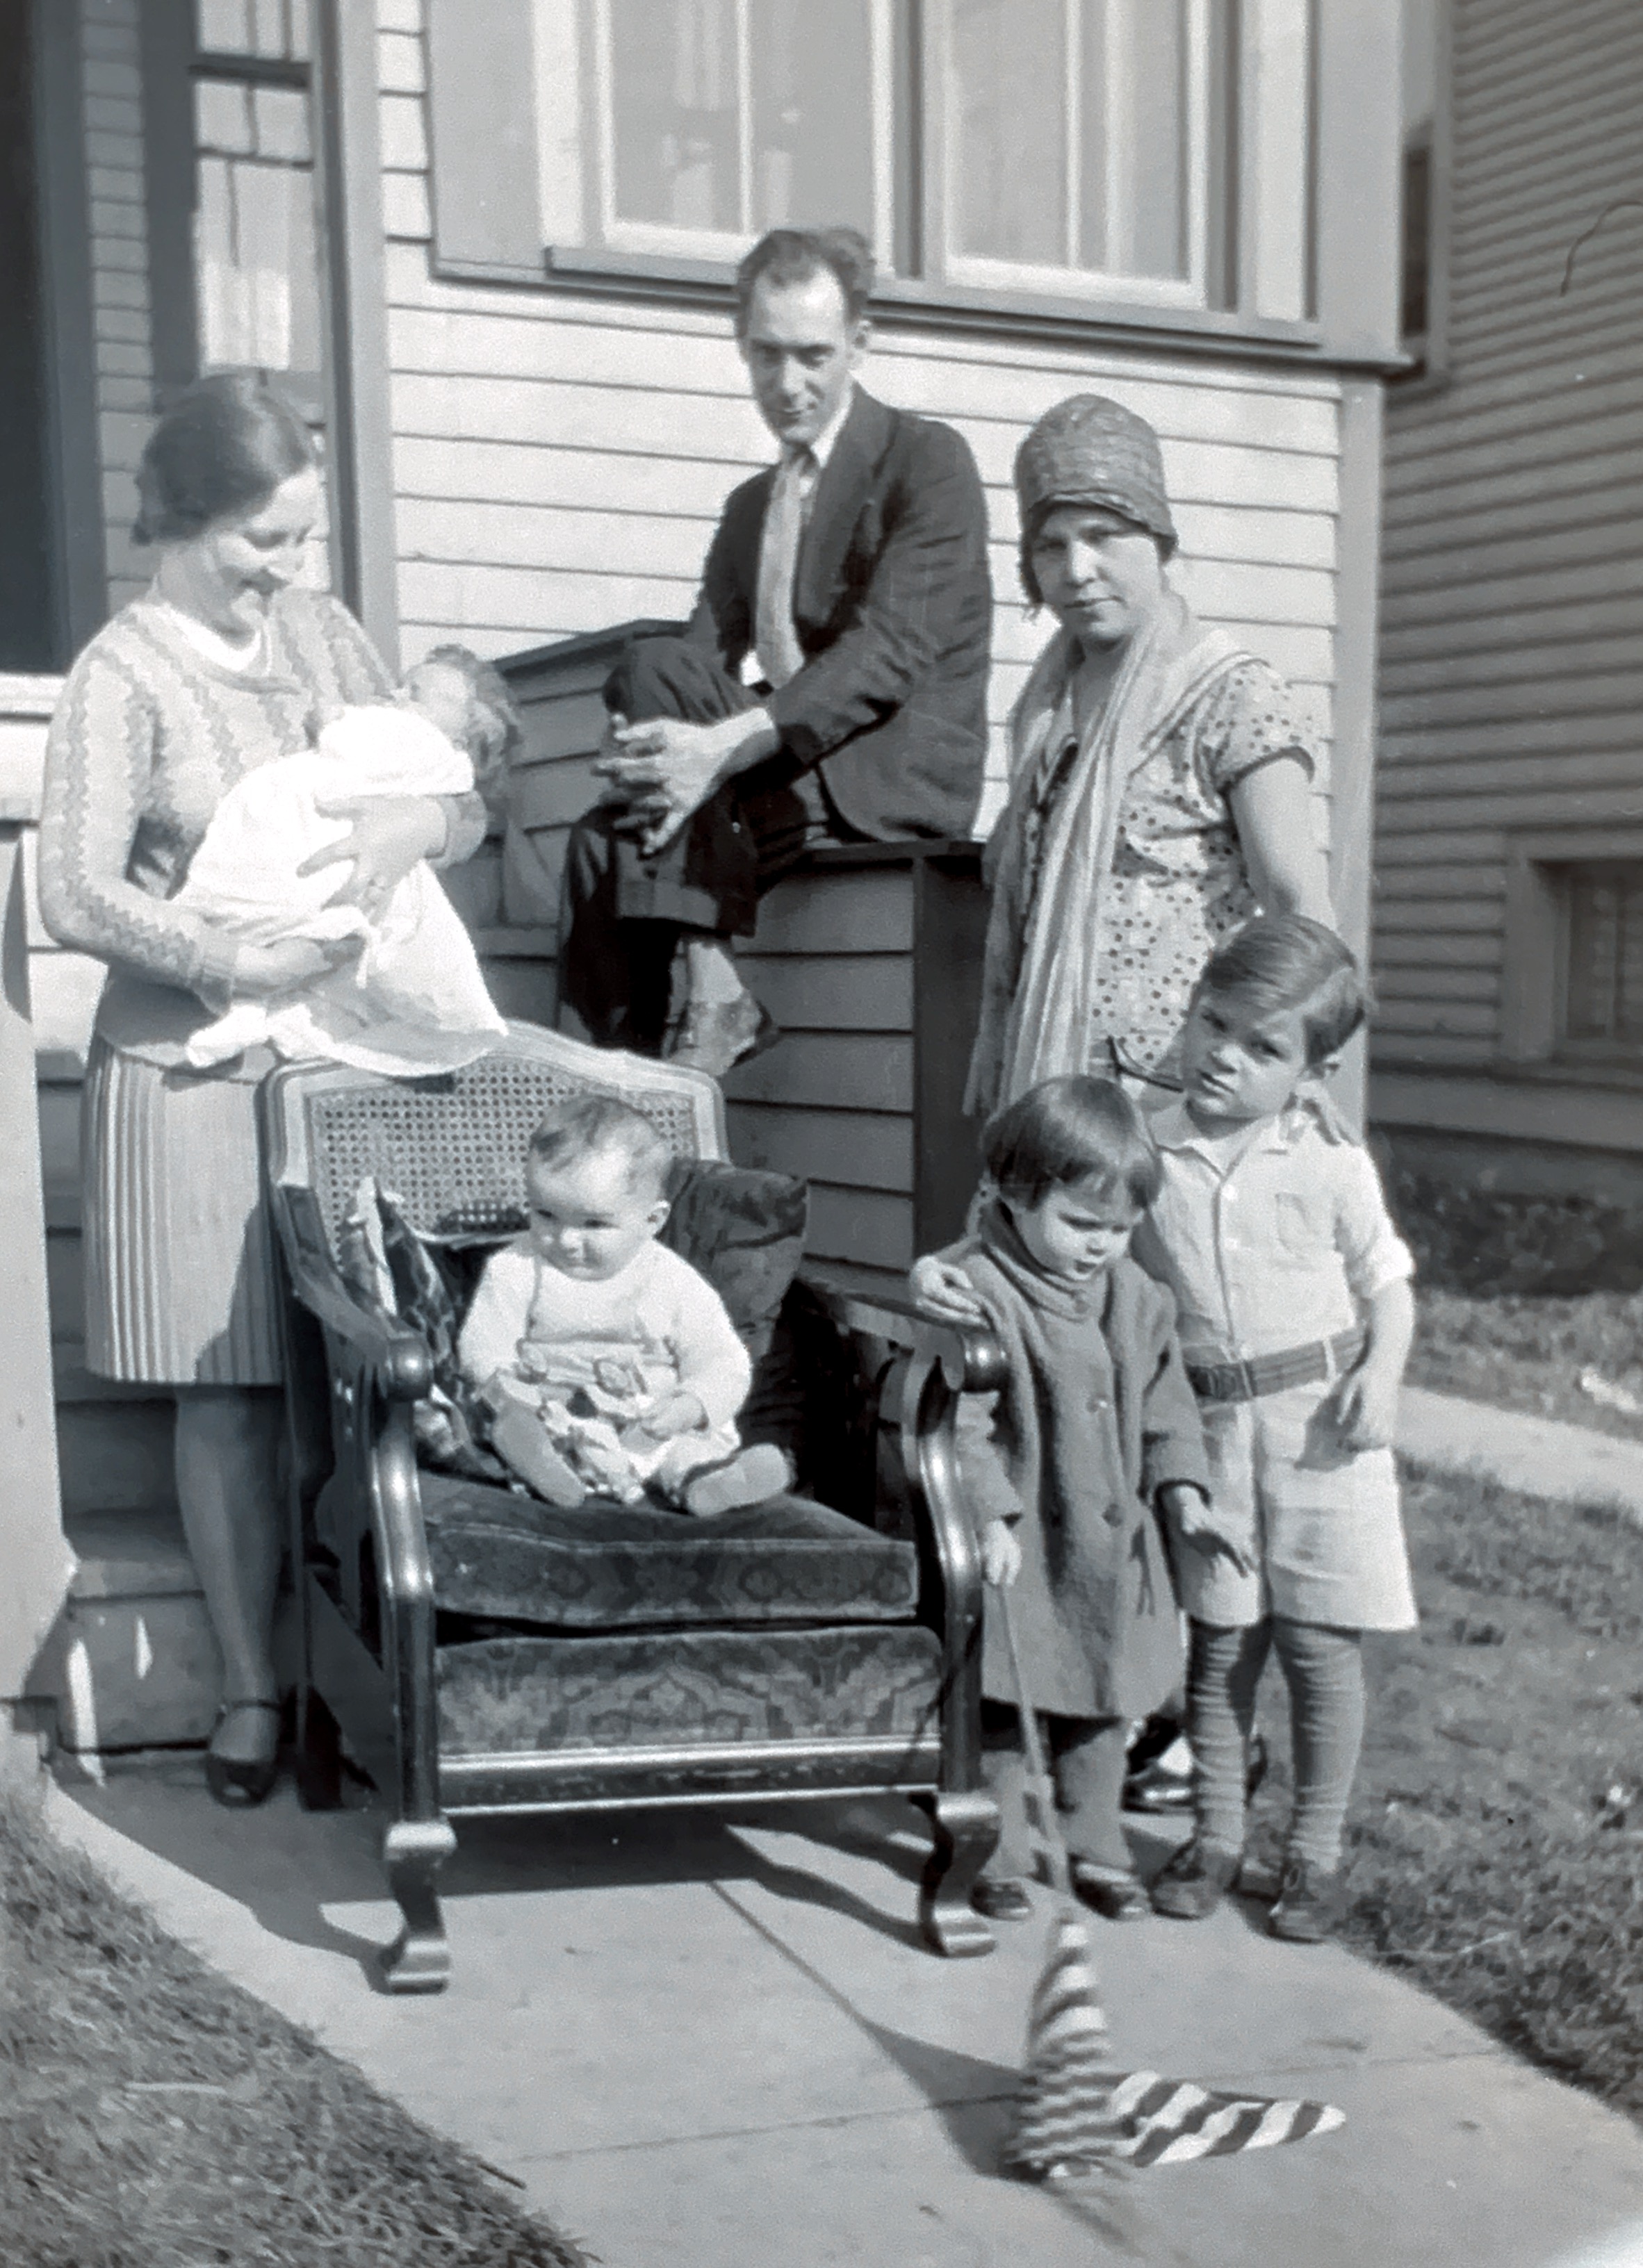 Chicago 1930. These are my grandparents and my infant aunt and uncle.  The little boy with his arm around the little girl are my parents.  This app enabled me to find this never before seen treasure!